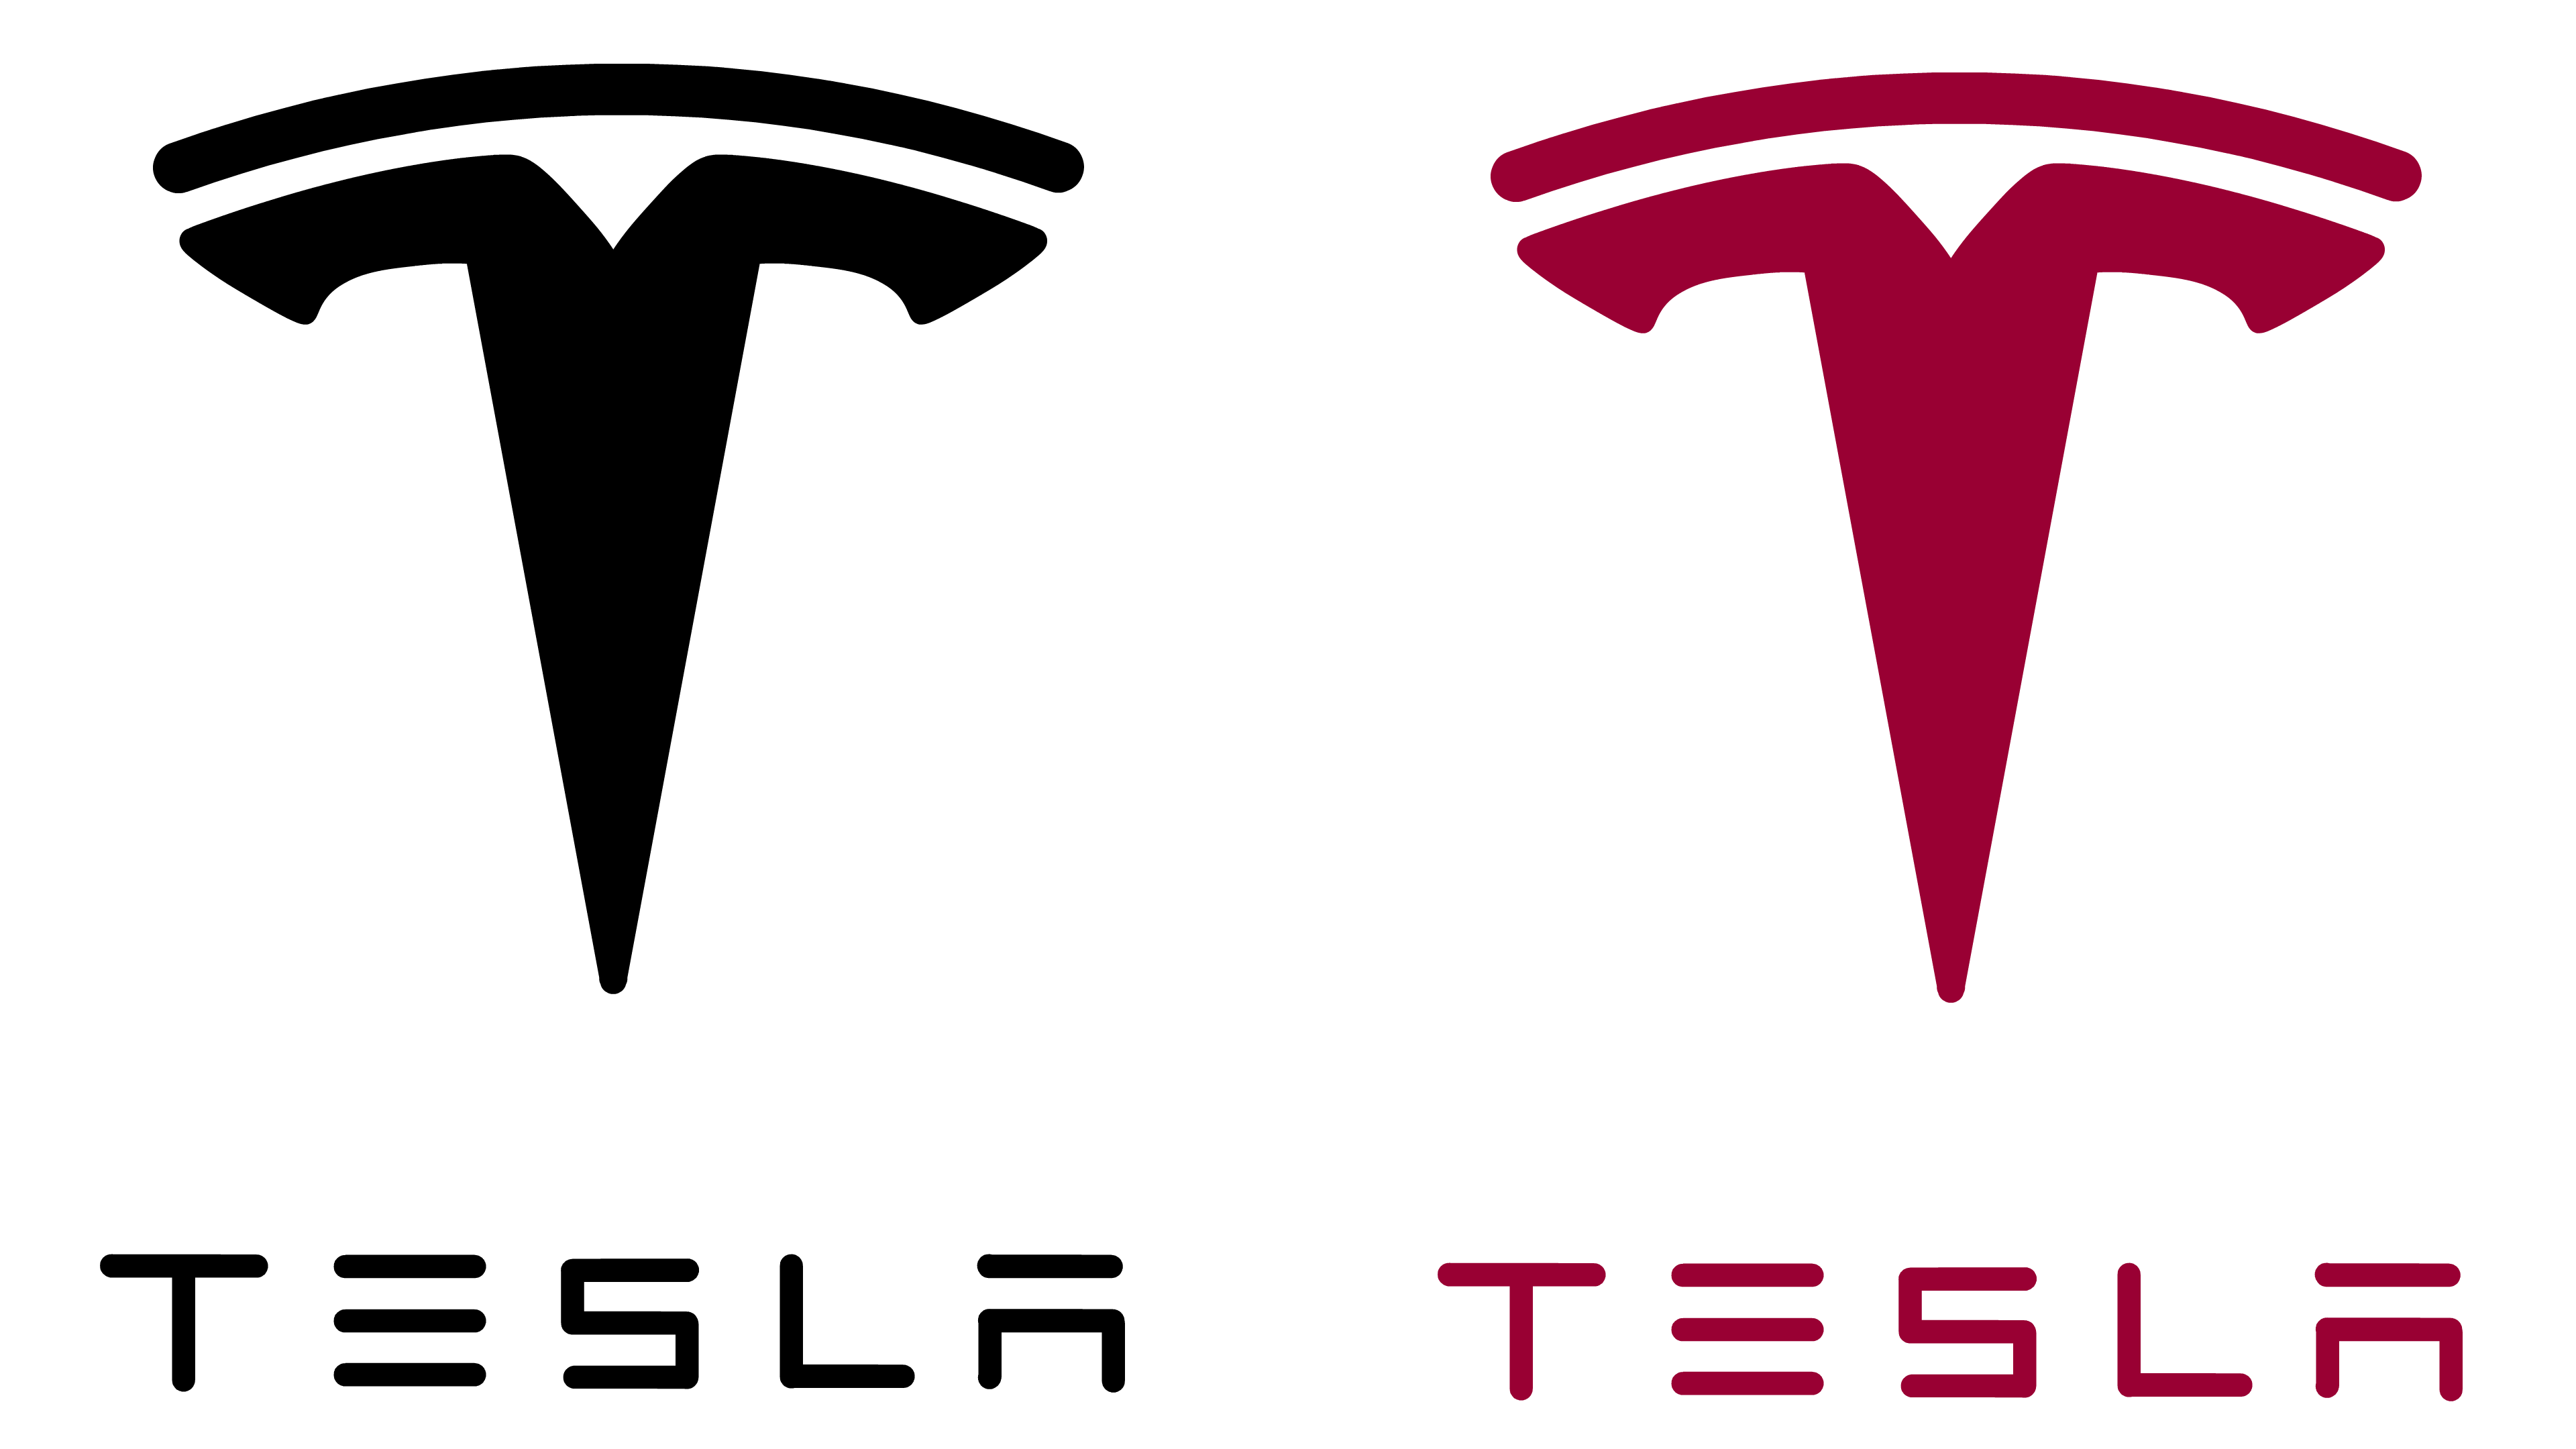 Tesla Logo PNG HD Image - PNG All | PNG All